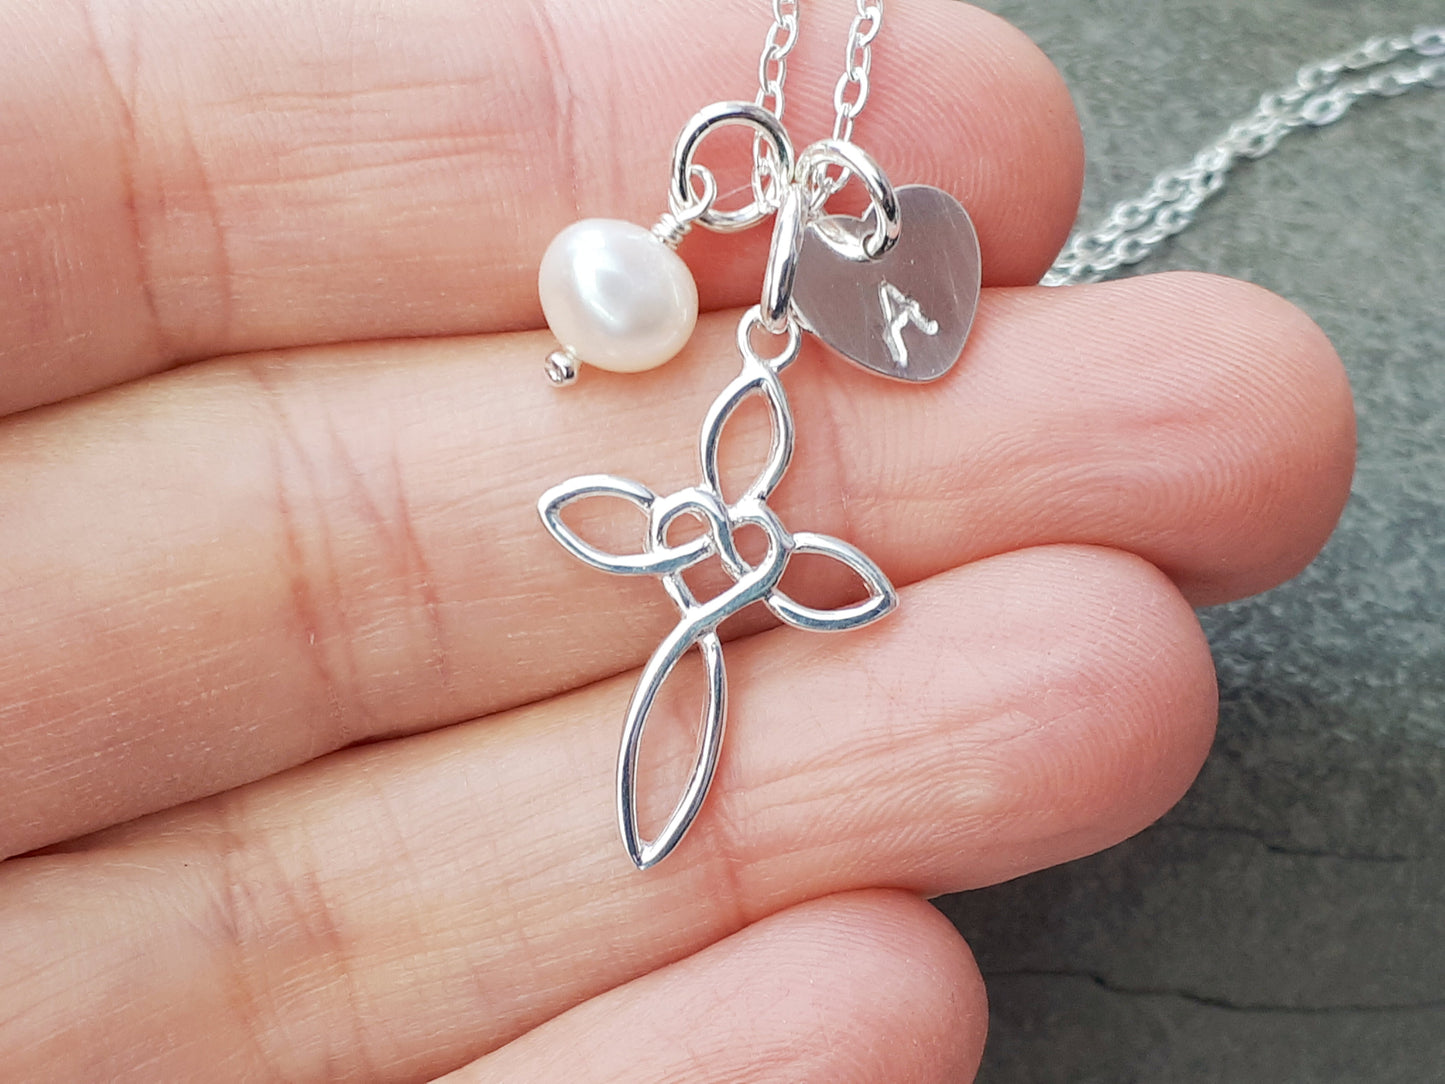 Personalised cross necklace with freshwater pearl.